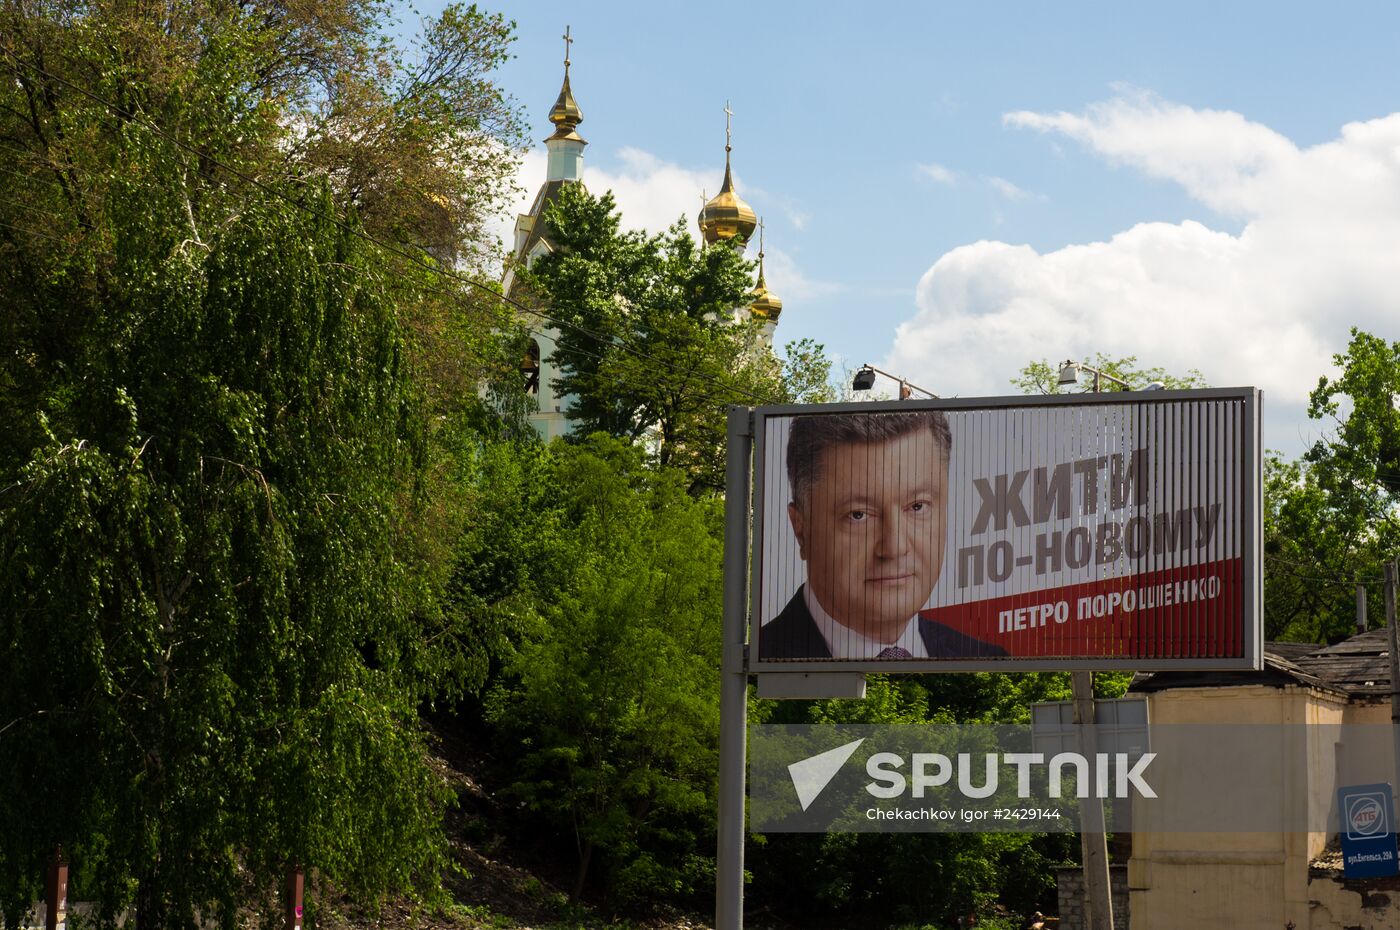 Election campaign posters displayed in Kharkov